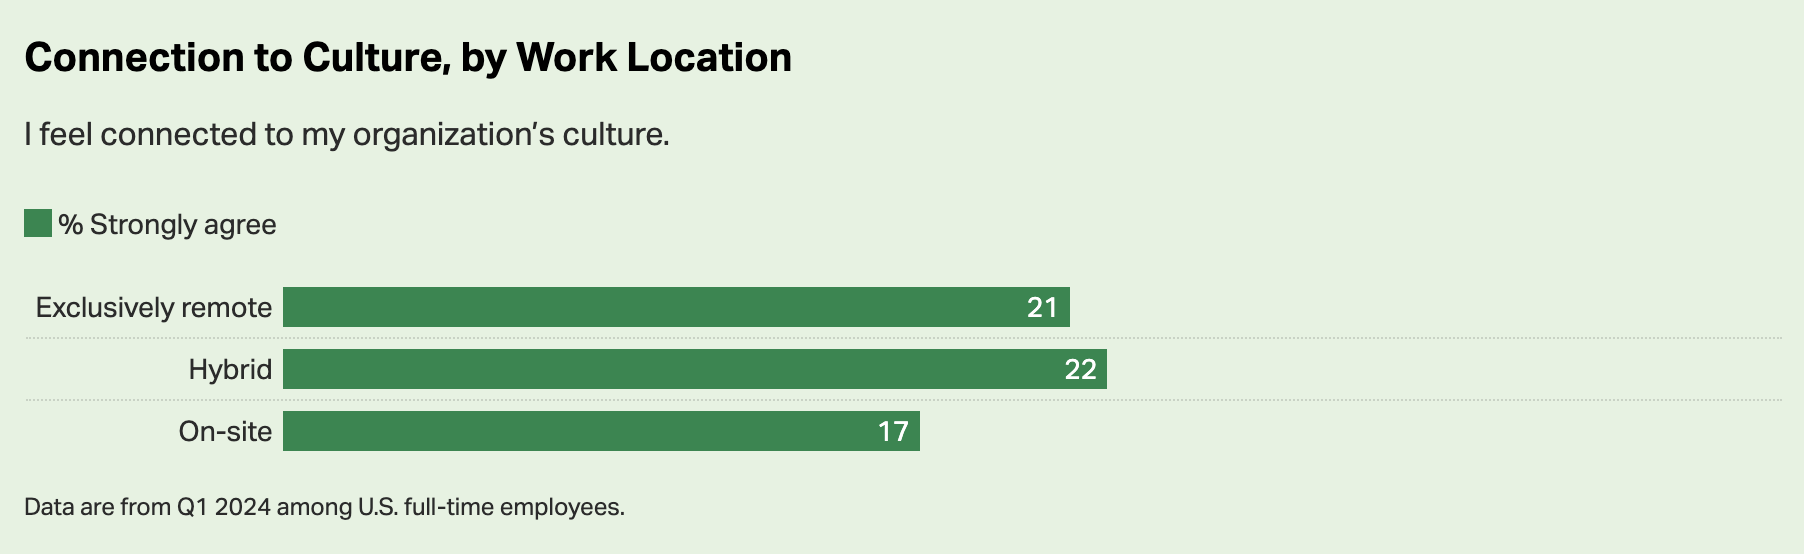 Source: Gallup